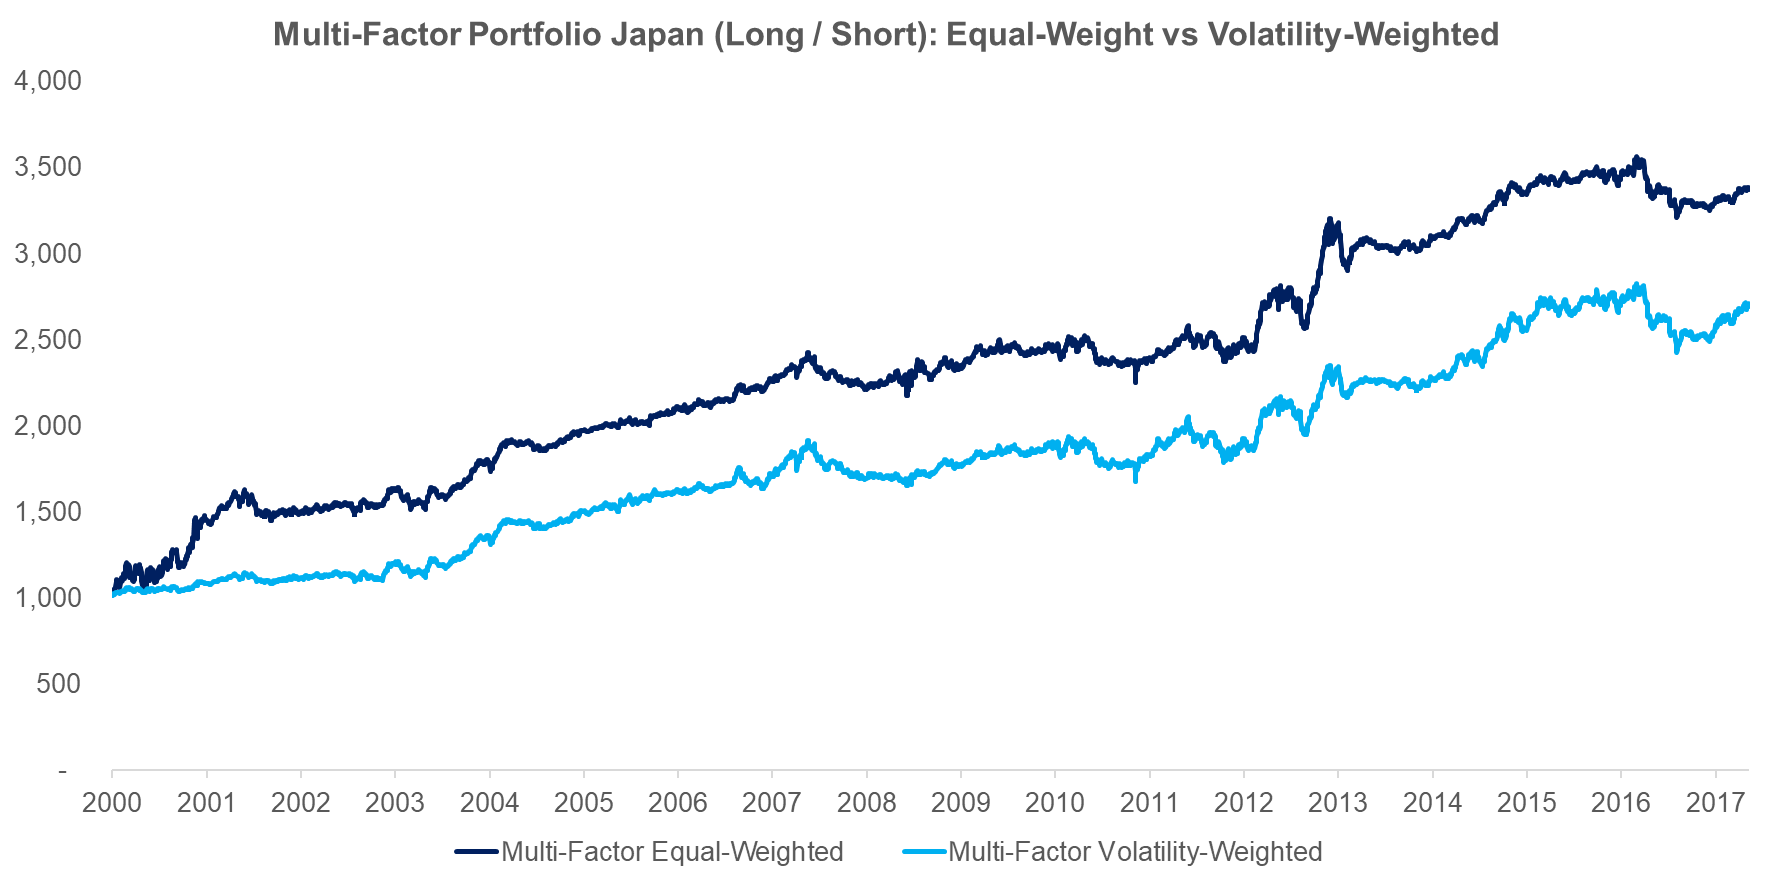 Multi-Factor Portfolio Japan (Long Short) Equal-Weight vs Volatility-Weighted